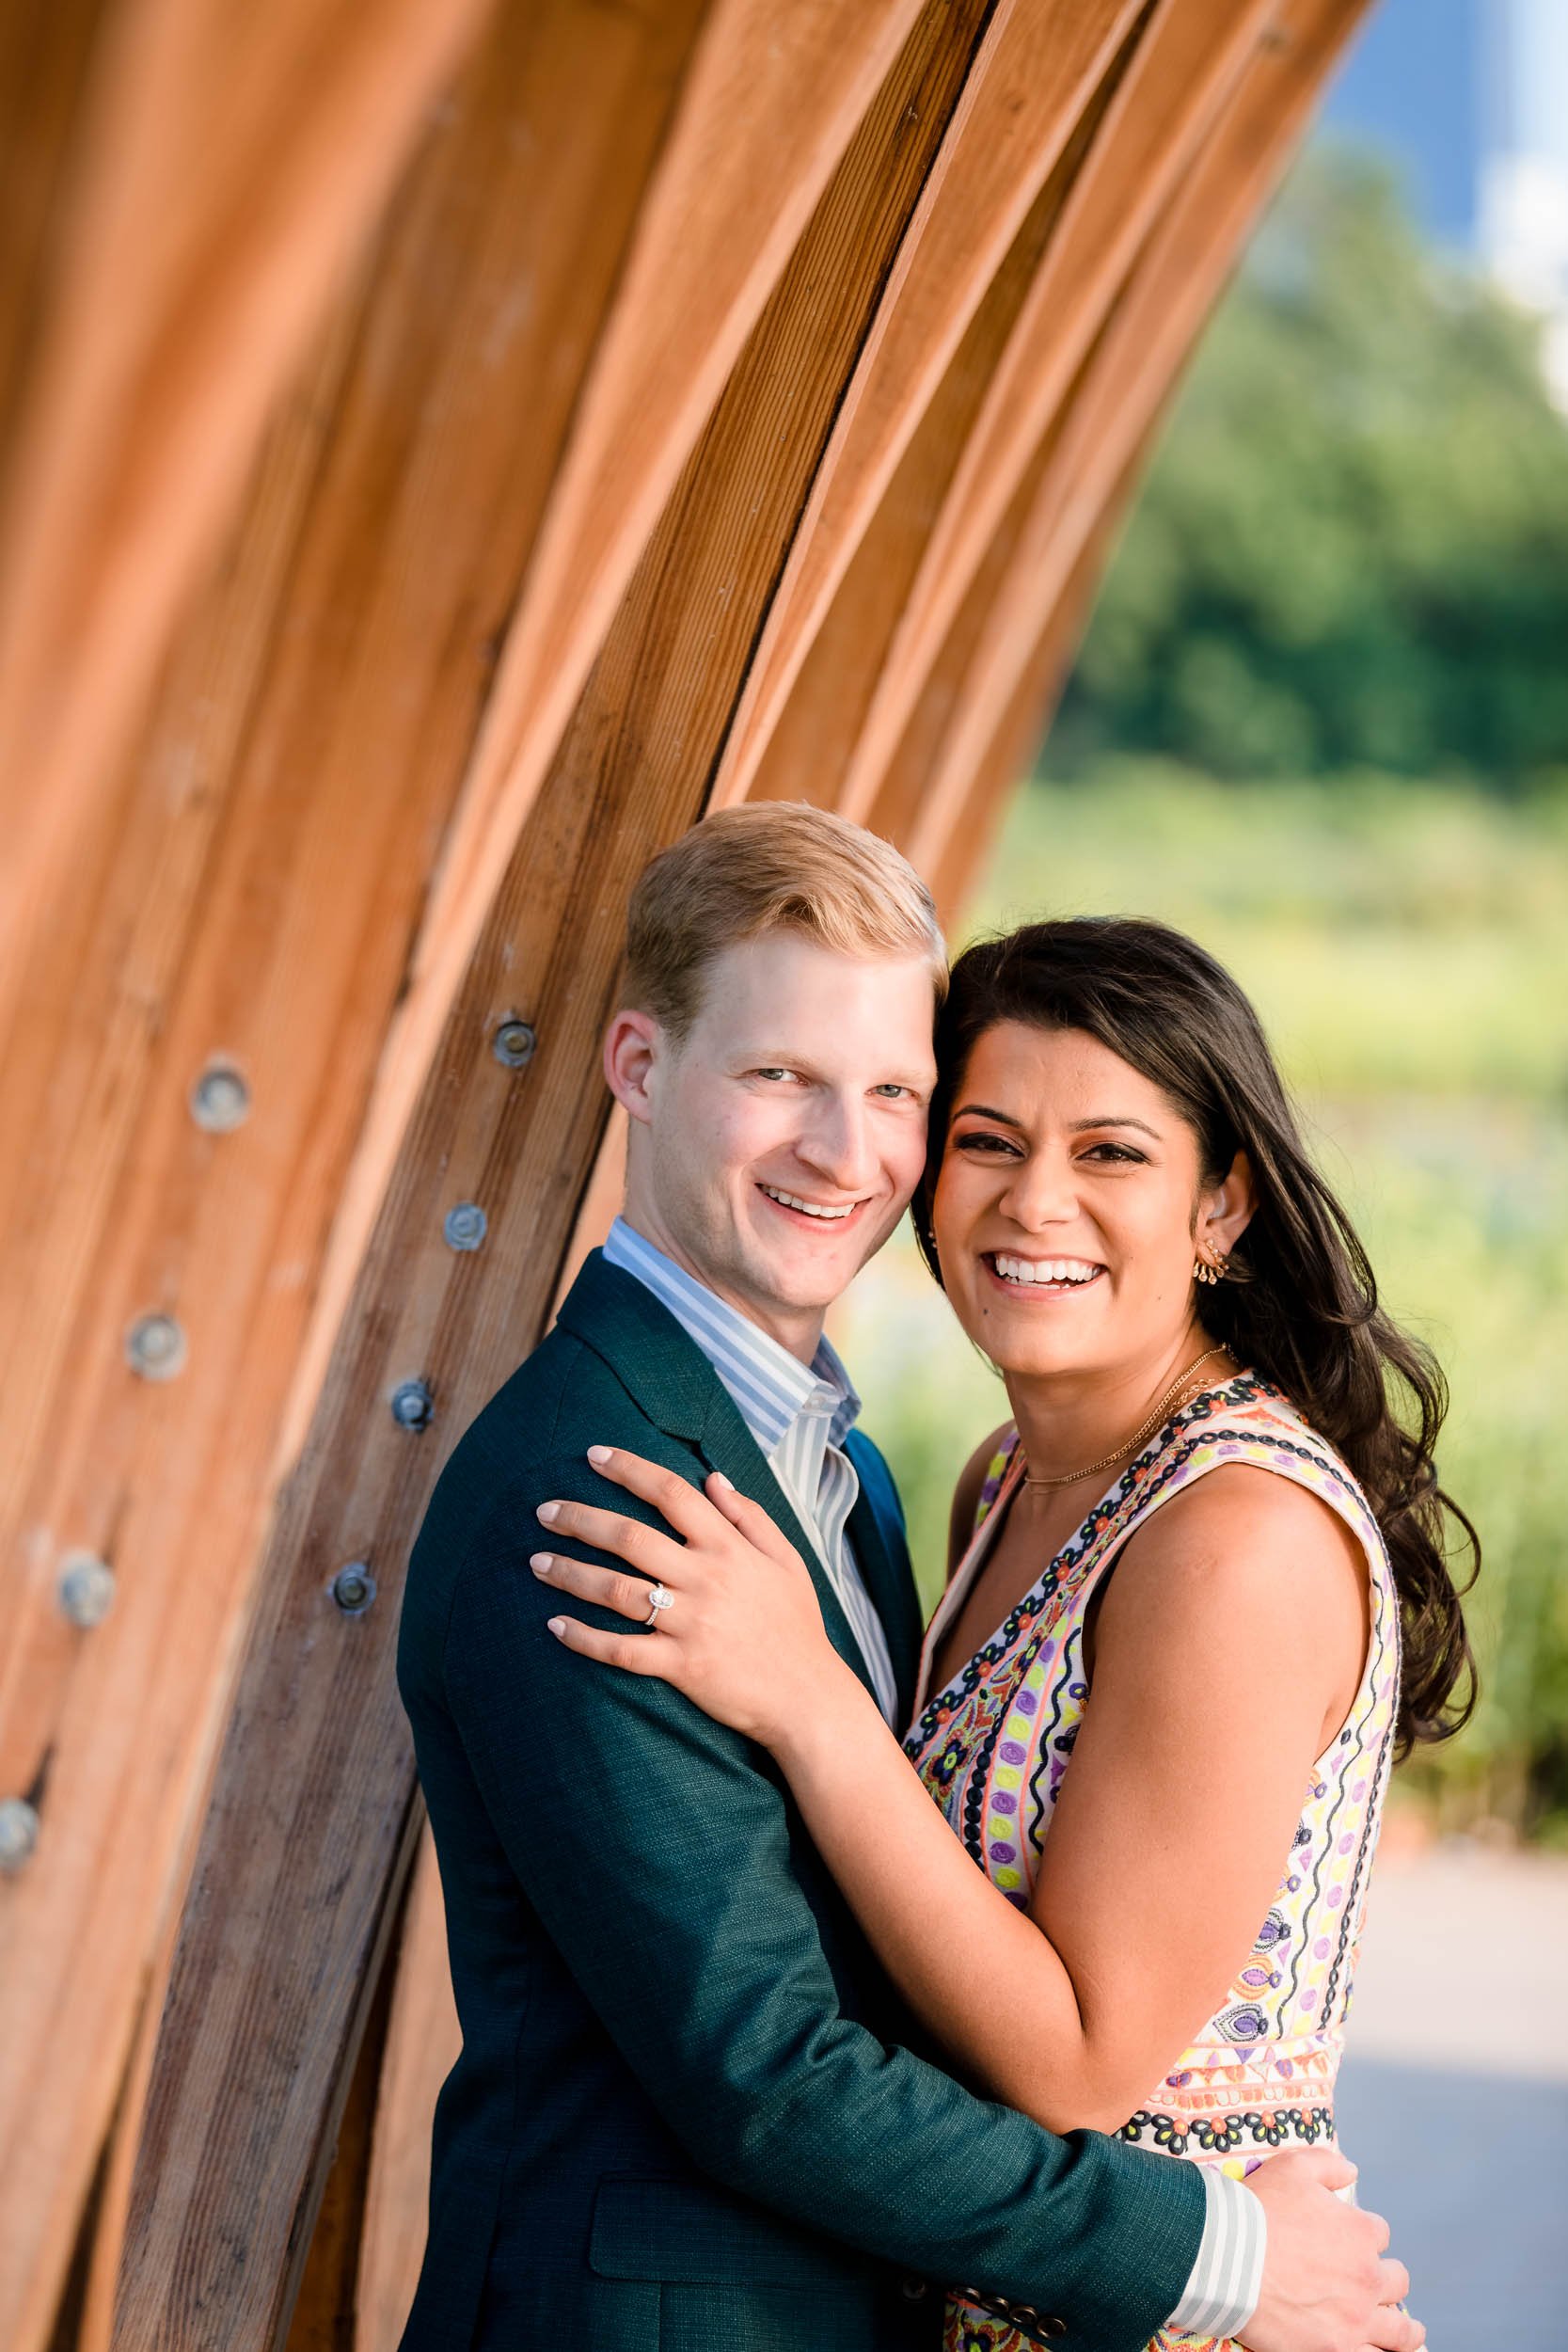 Lincoln Park Honeycomb | Fun Engagement Session | Chicago IL